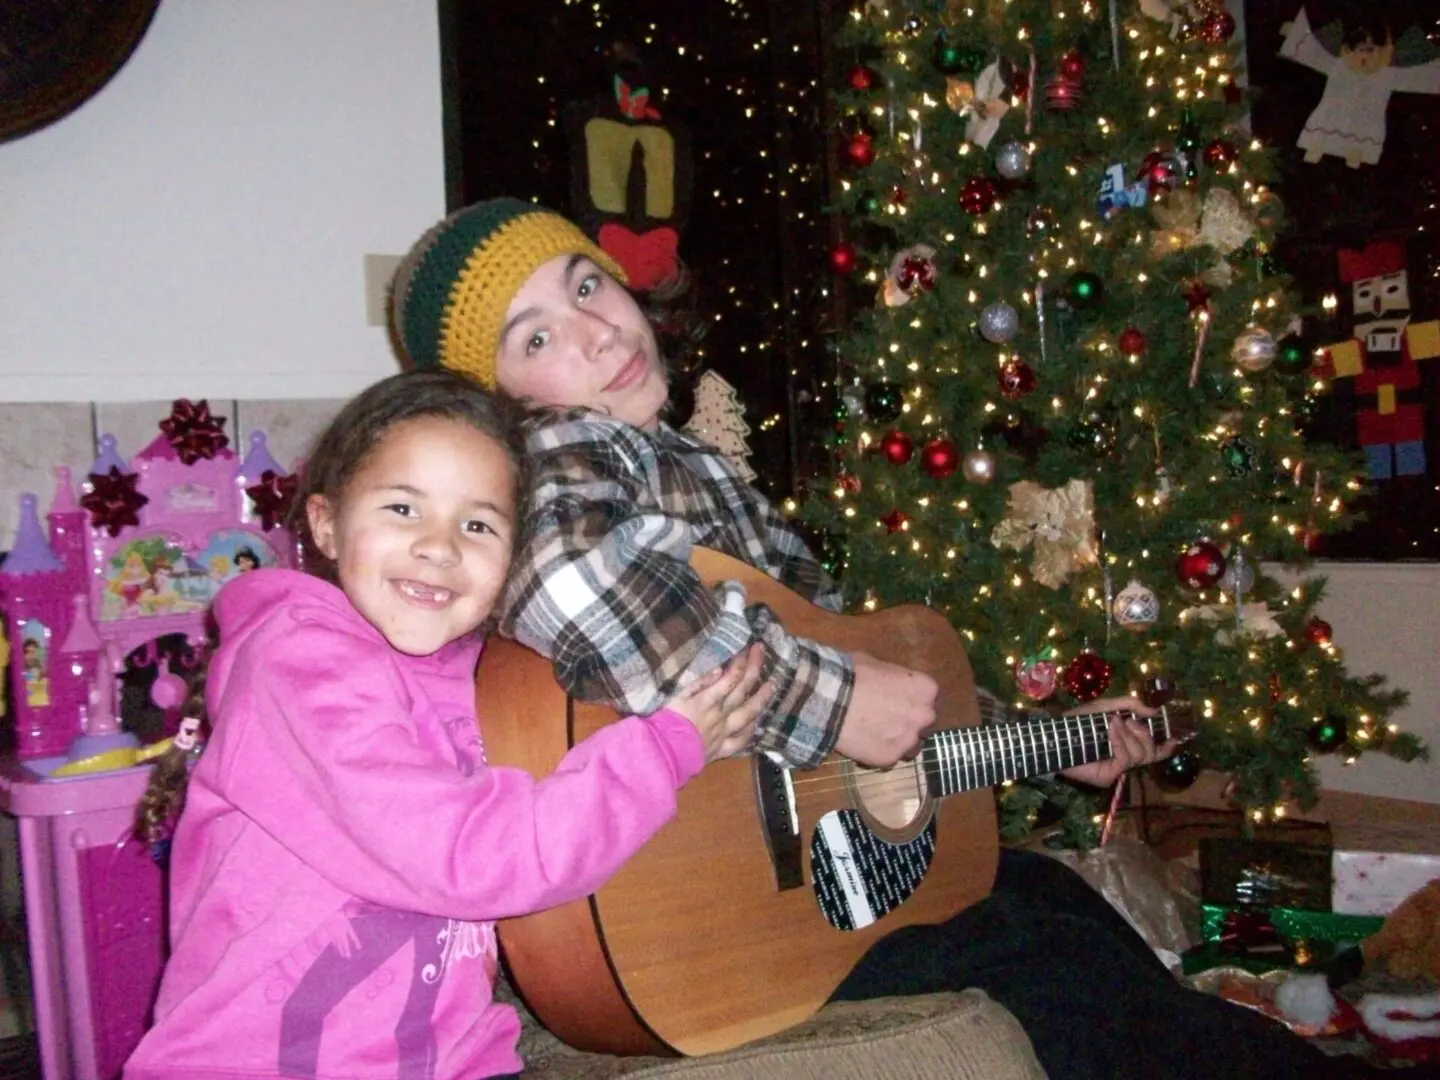 A girl and boy playing guitar in front of christmas tree.